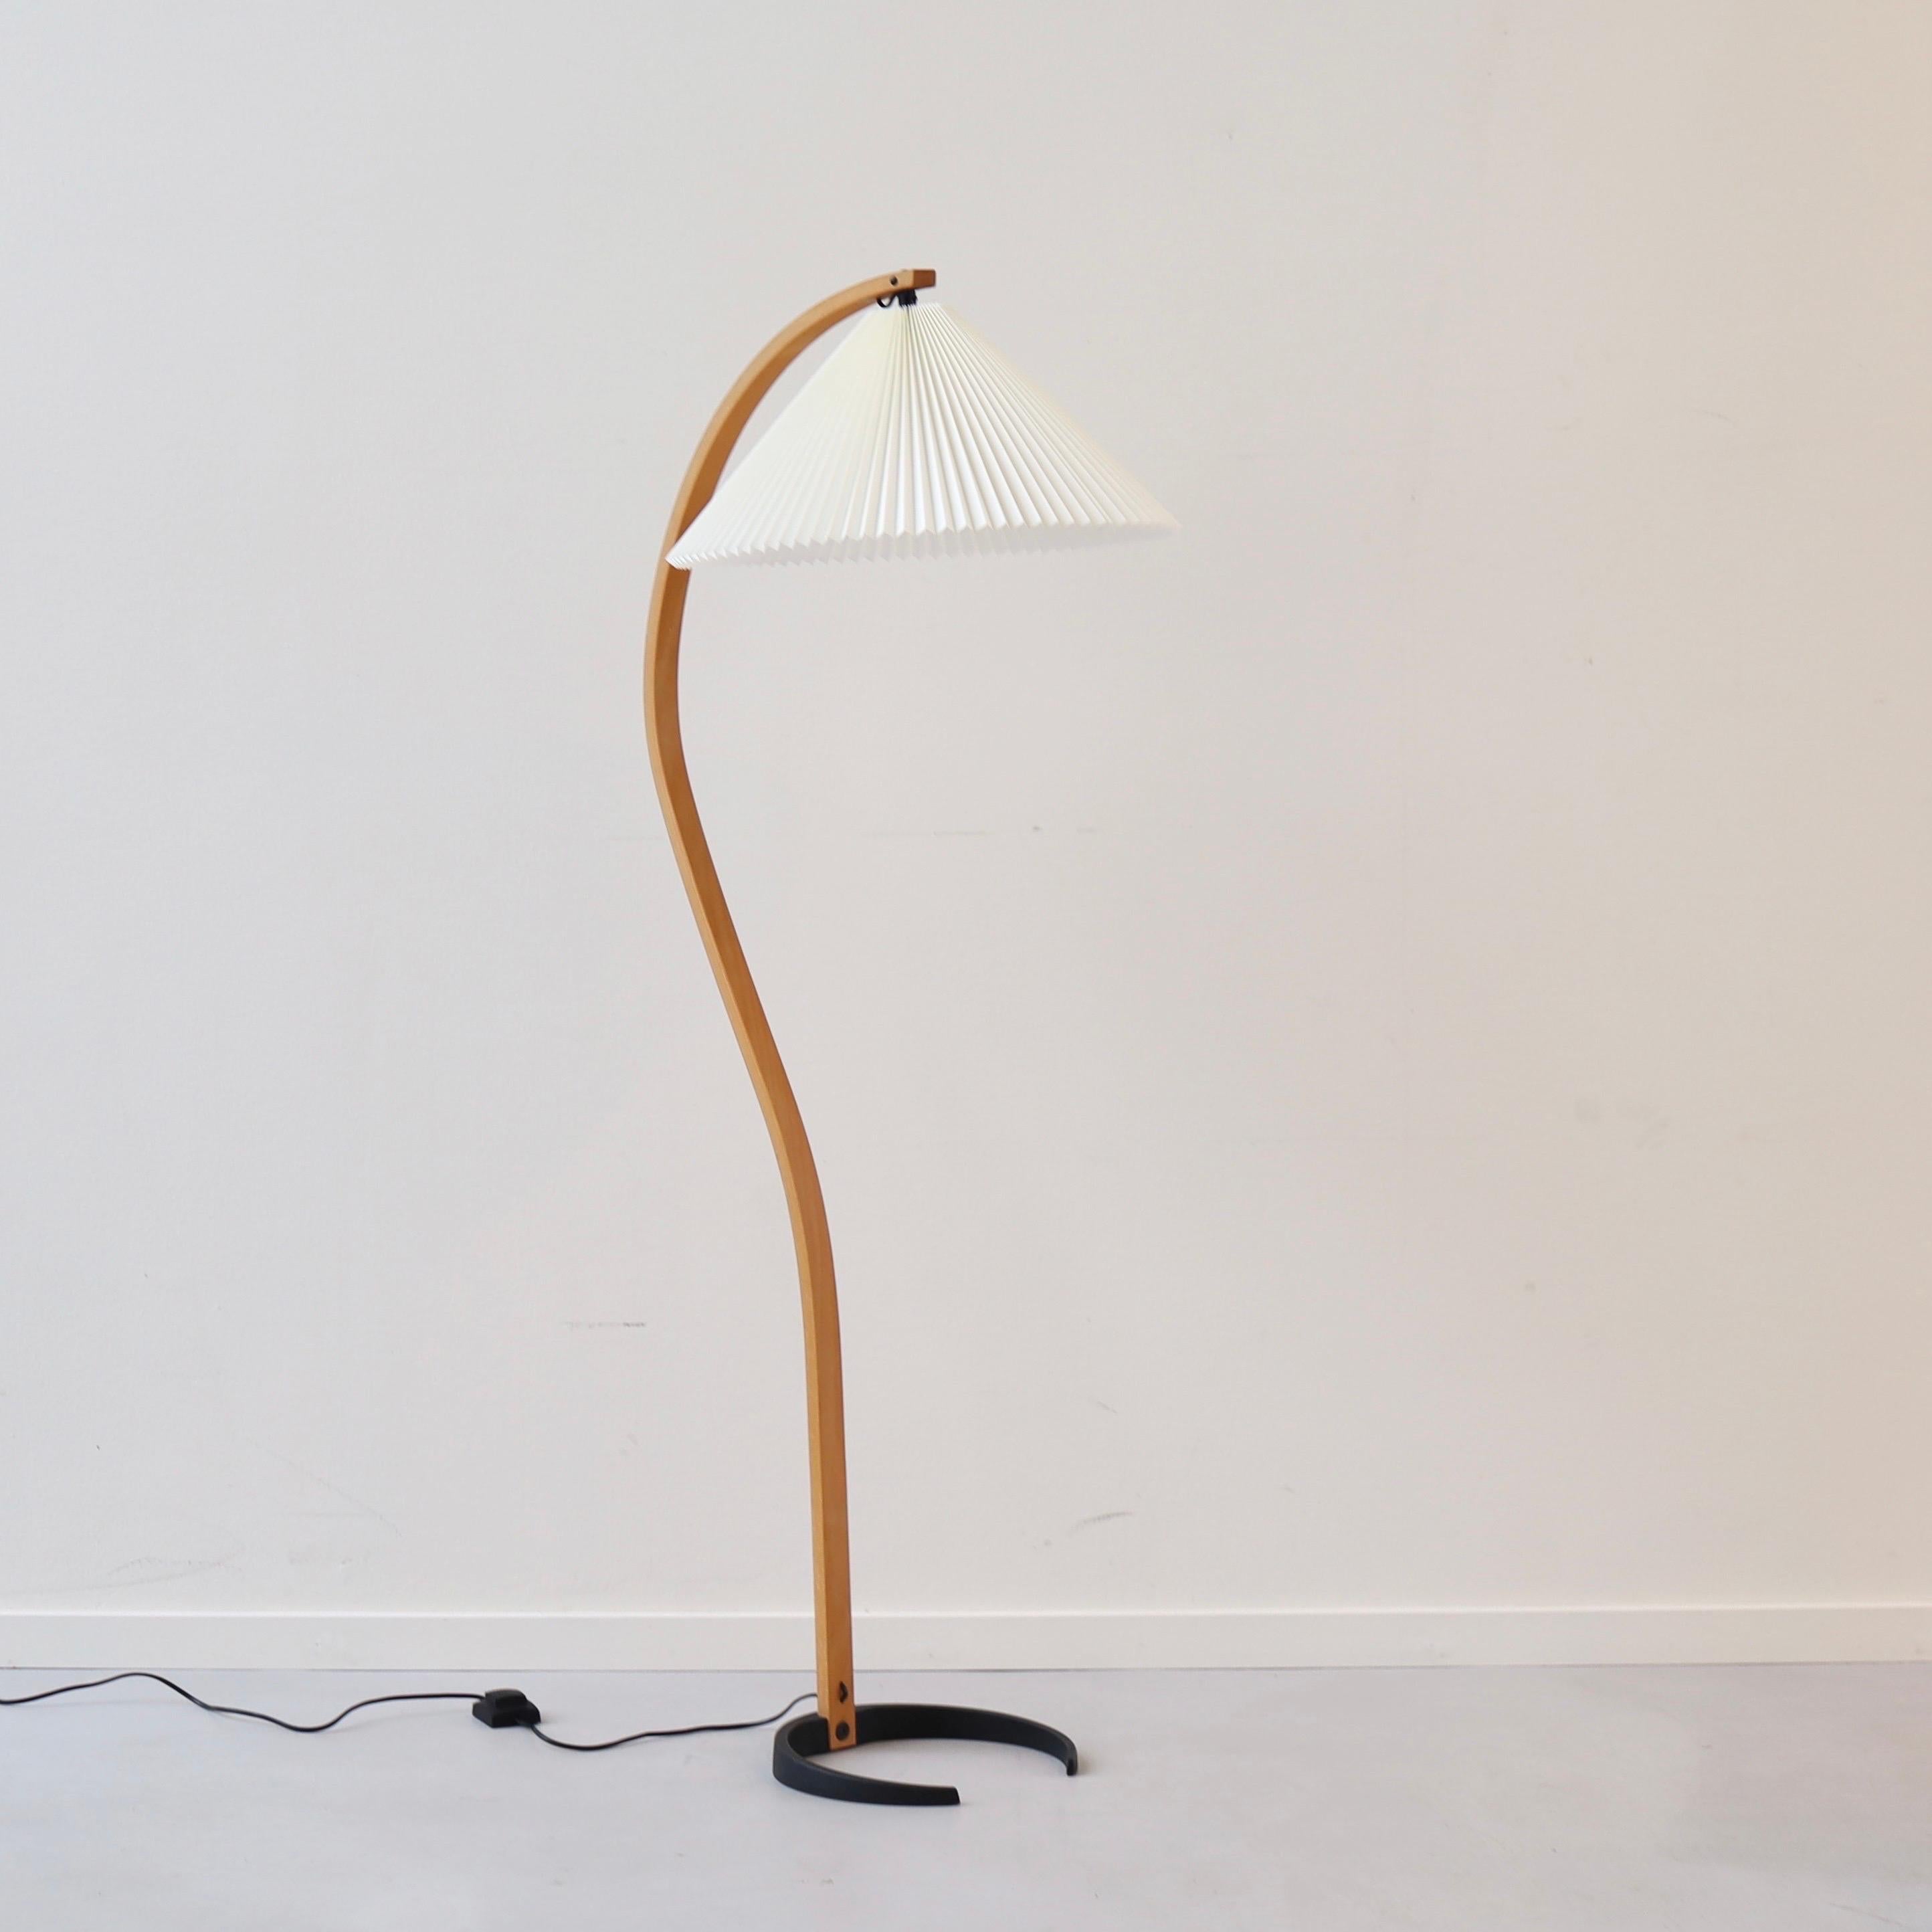 An original Danish Timberline no. 840 floor lamp by Mads Caprani. A striking timeless design perfect for any modern interior.

* A bend beech veneer floor lamp with an egg-white fabric shade
* Style: 840
* Manufacturer: Caprani Light A/S Denmark
*